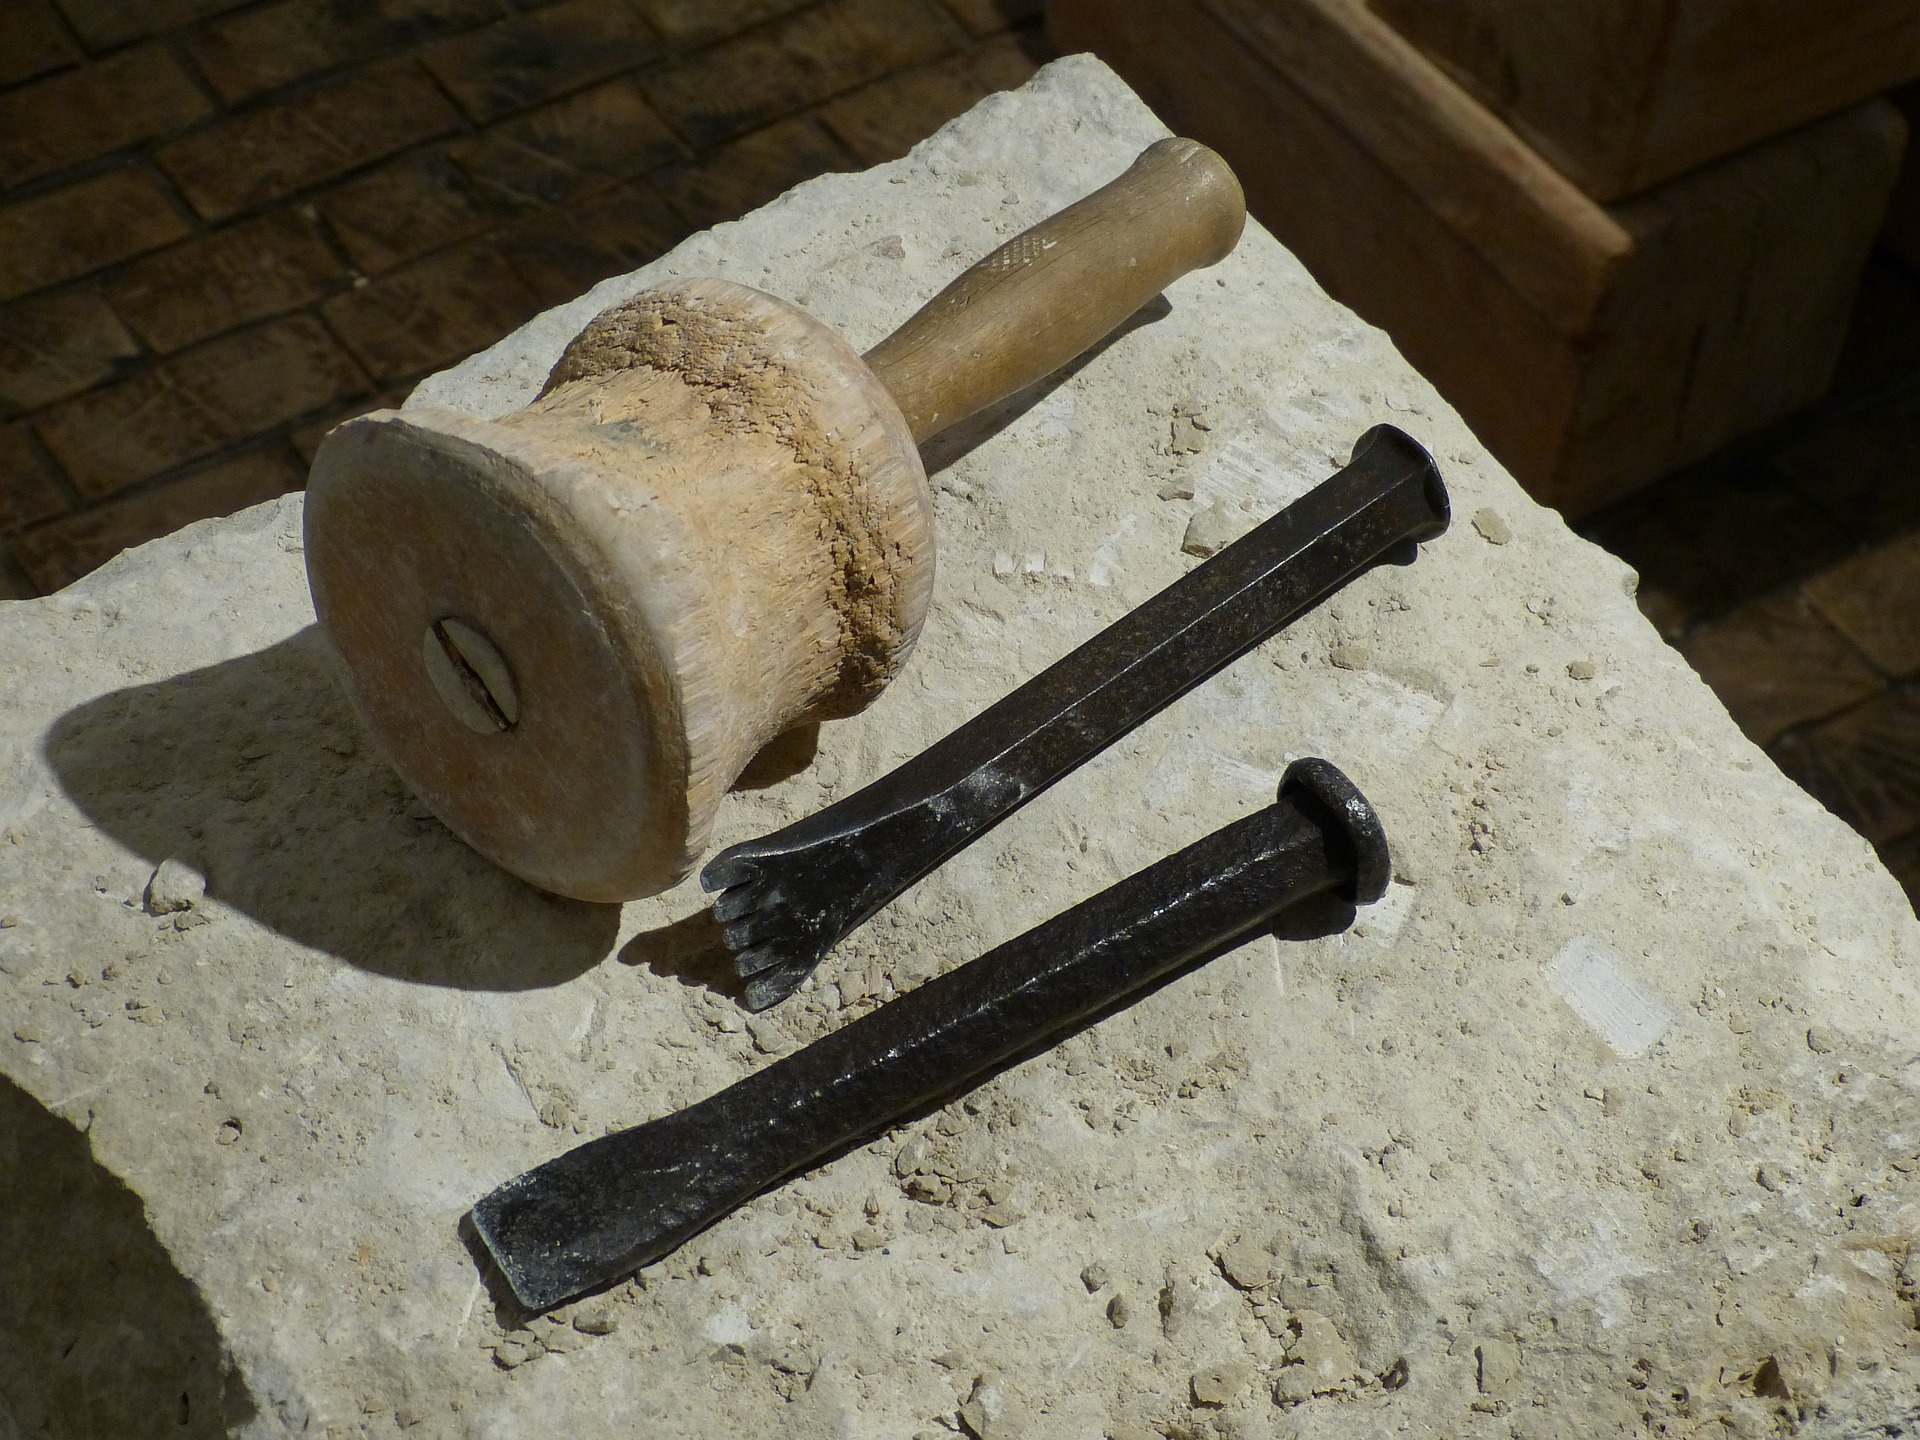 Image of two chisels and a wooden object